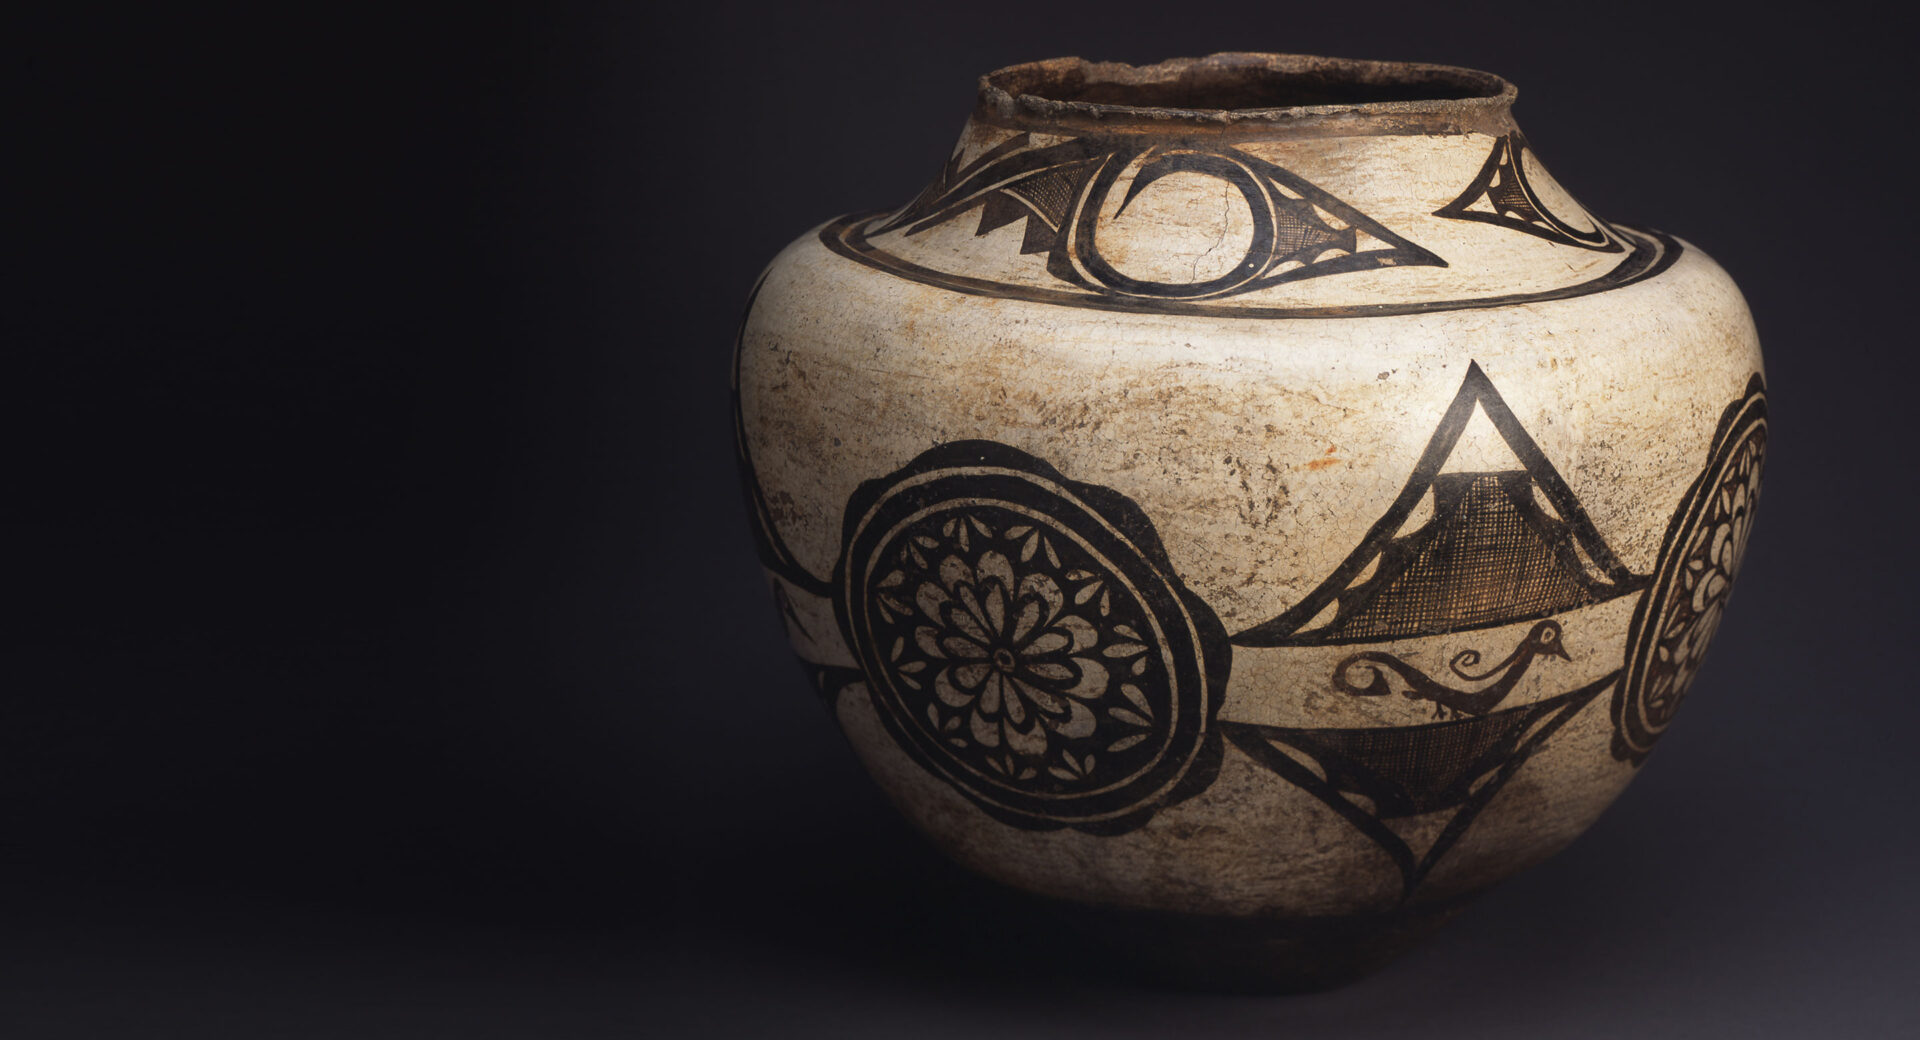 A white jar with brown designs on it.